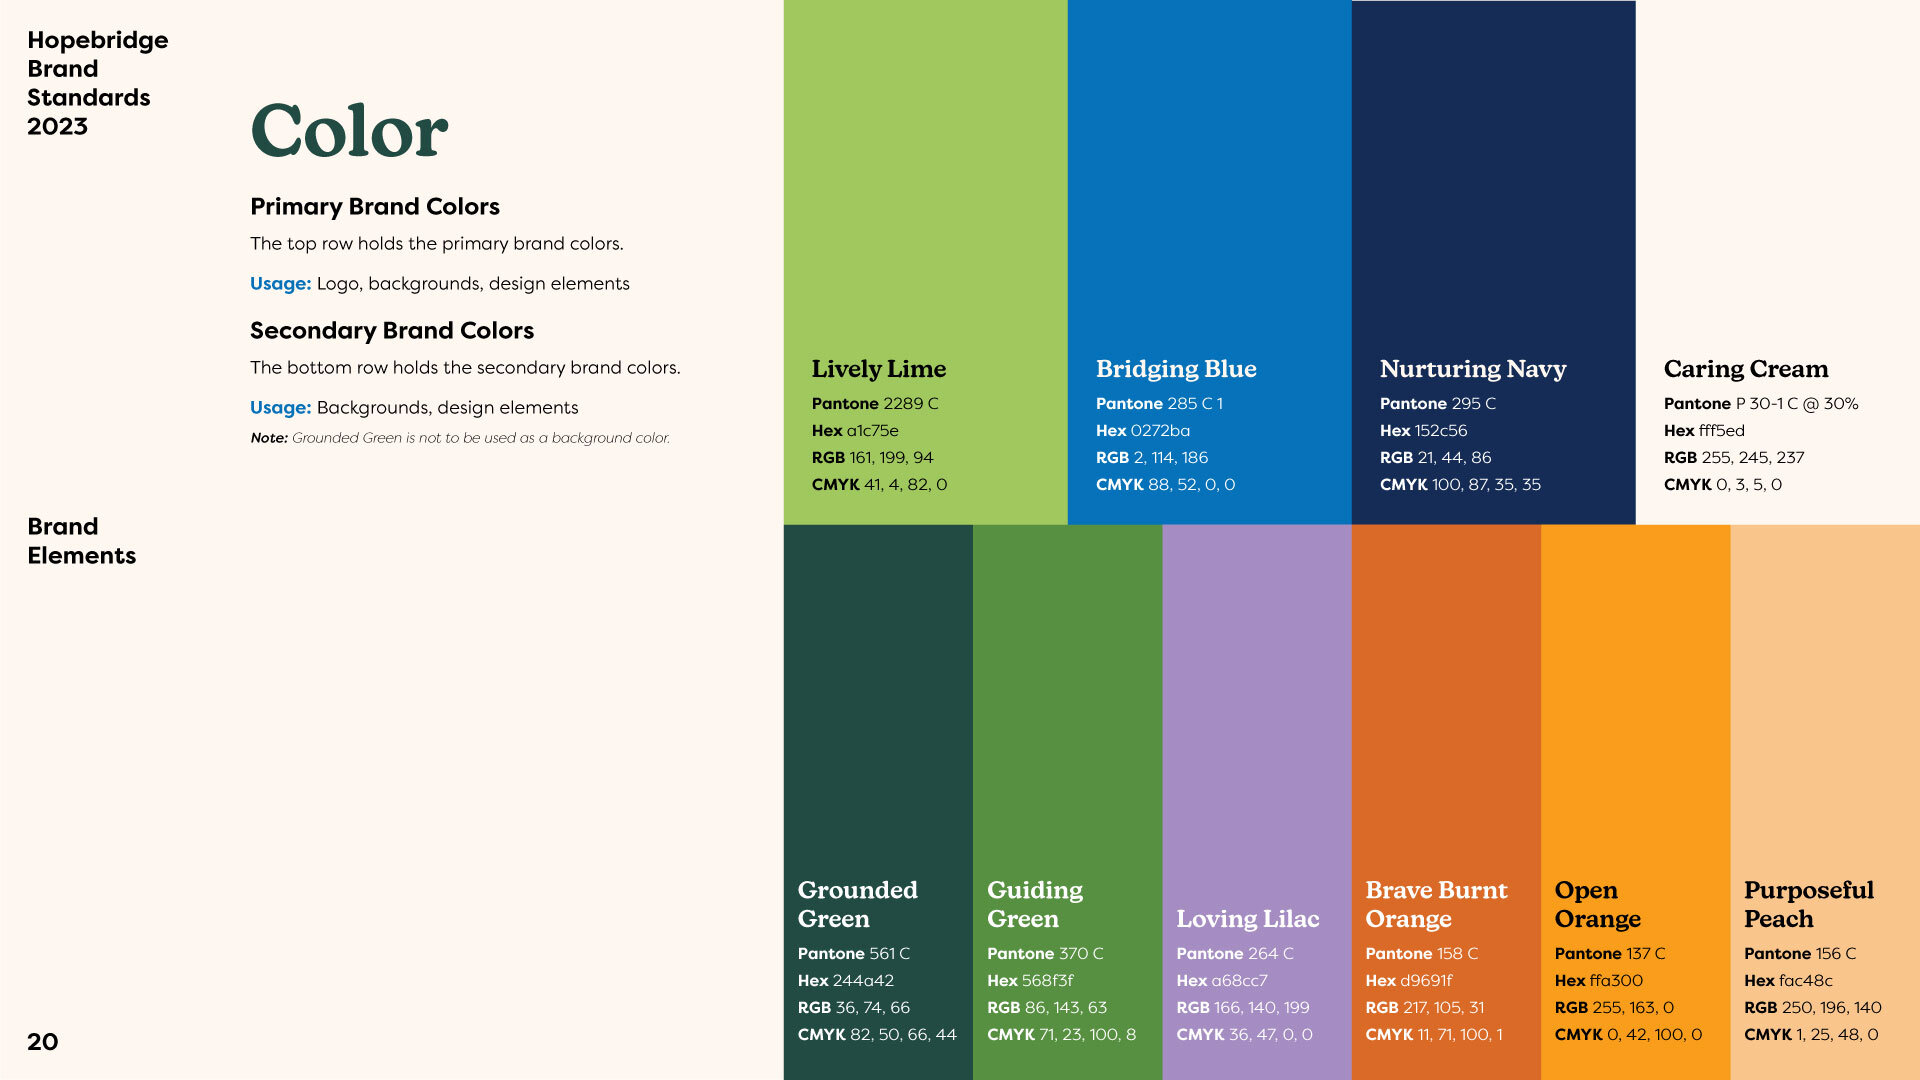 Hopebridge brand standards guide page dedicated to the brand's color palette